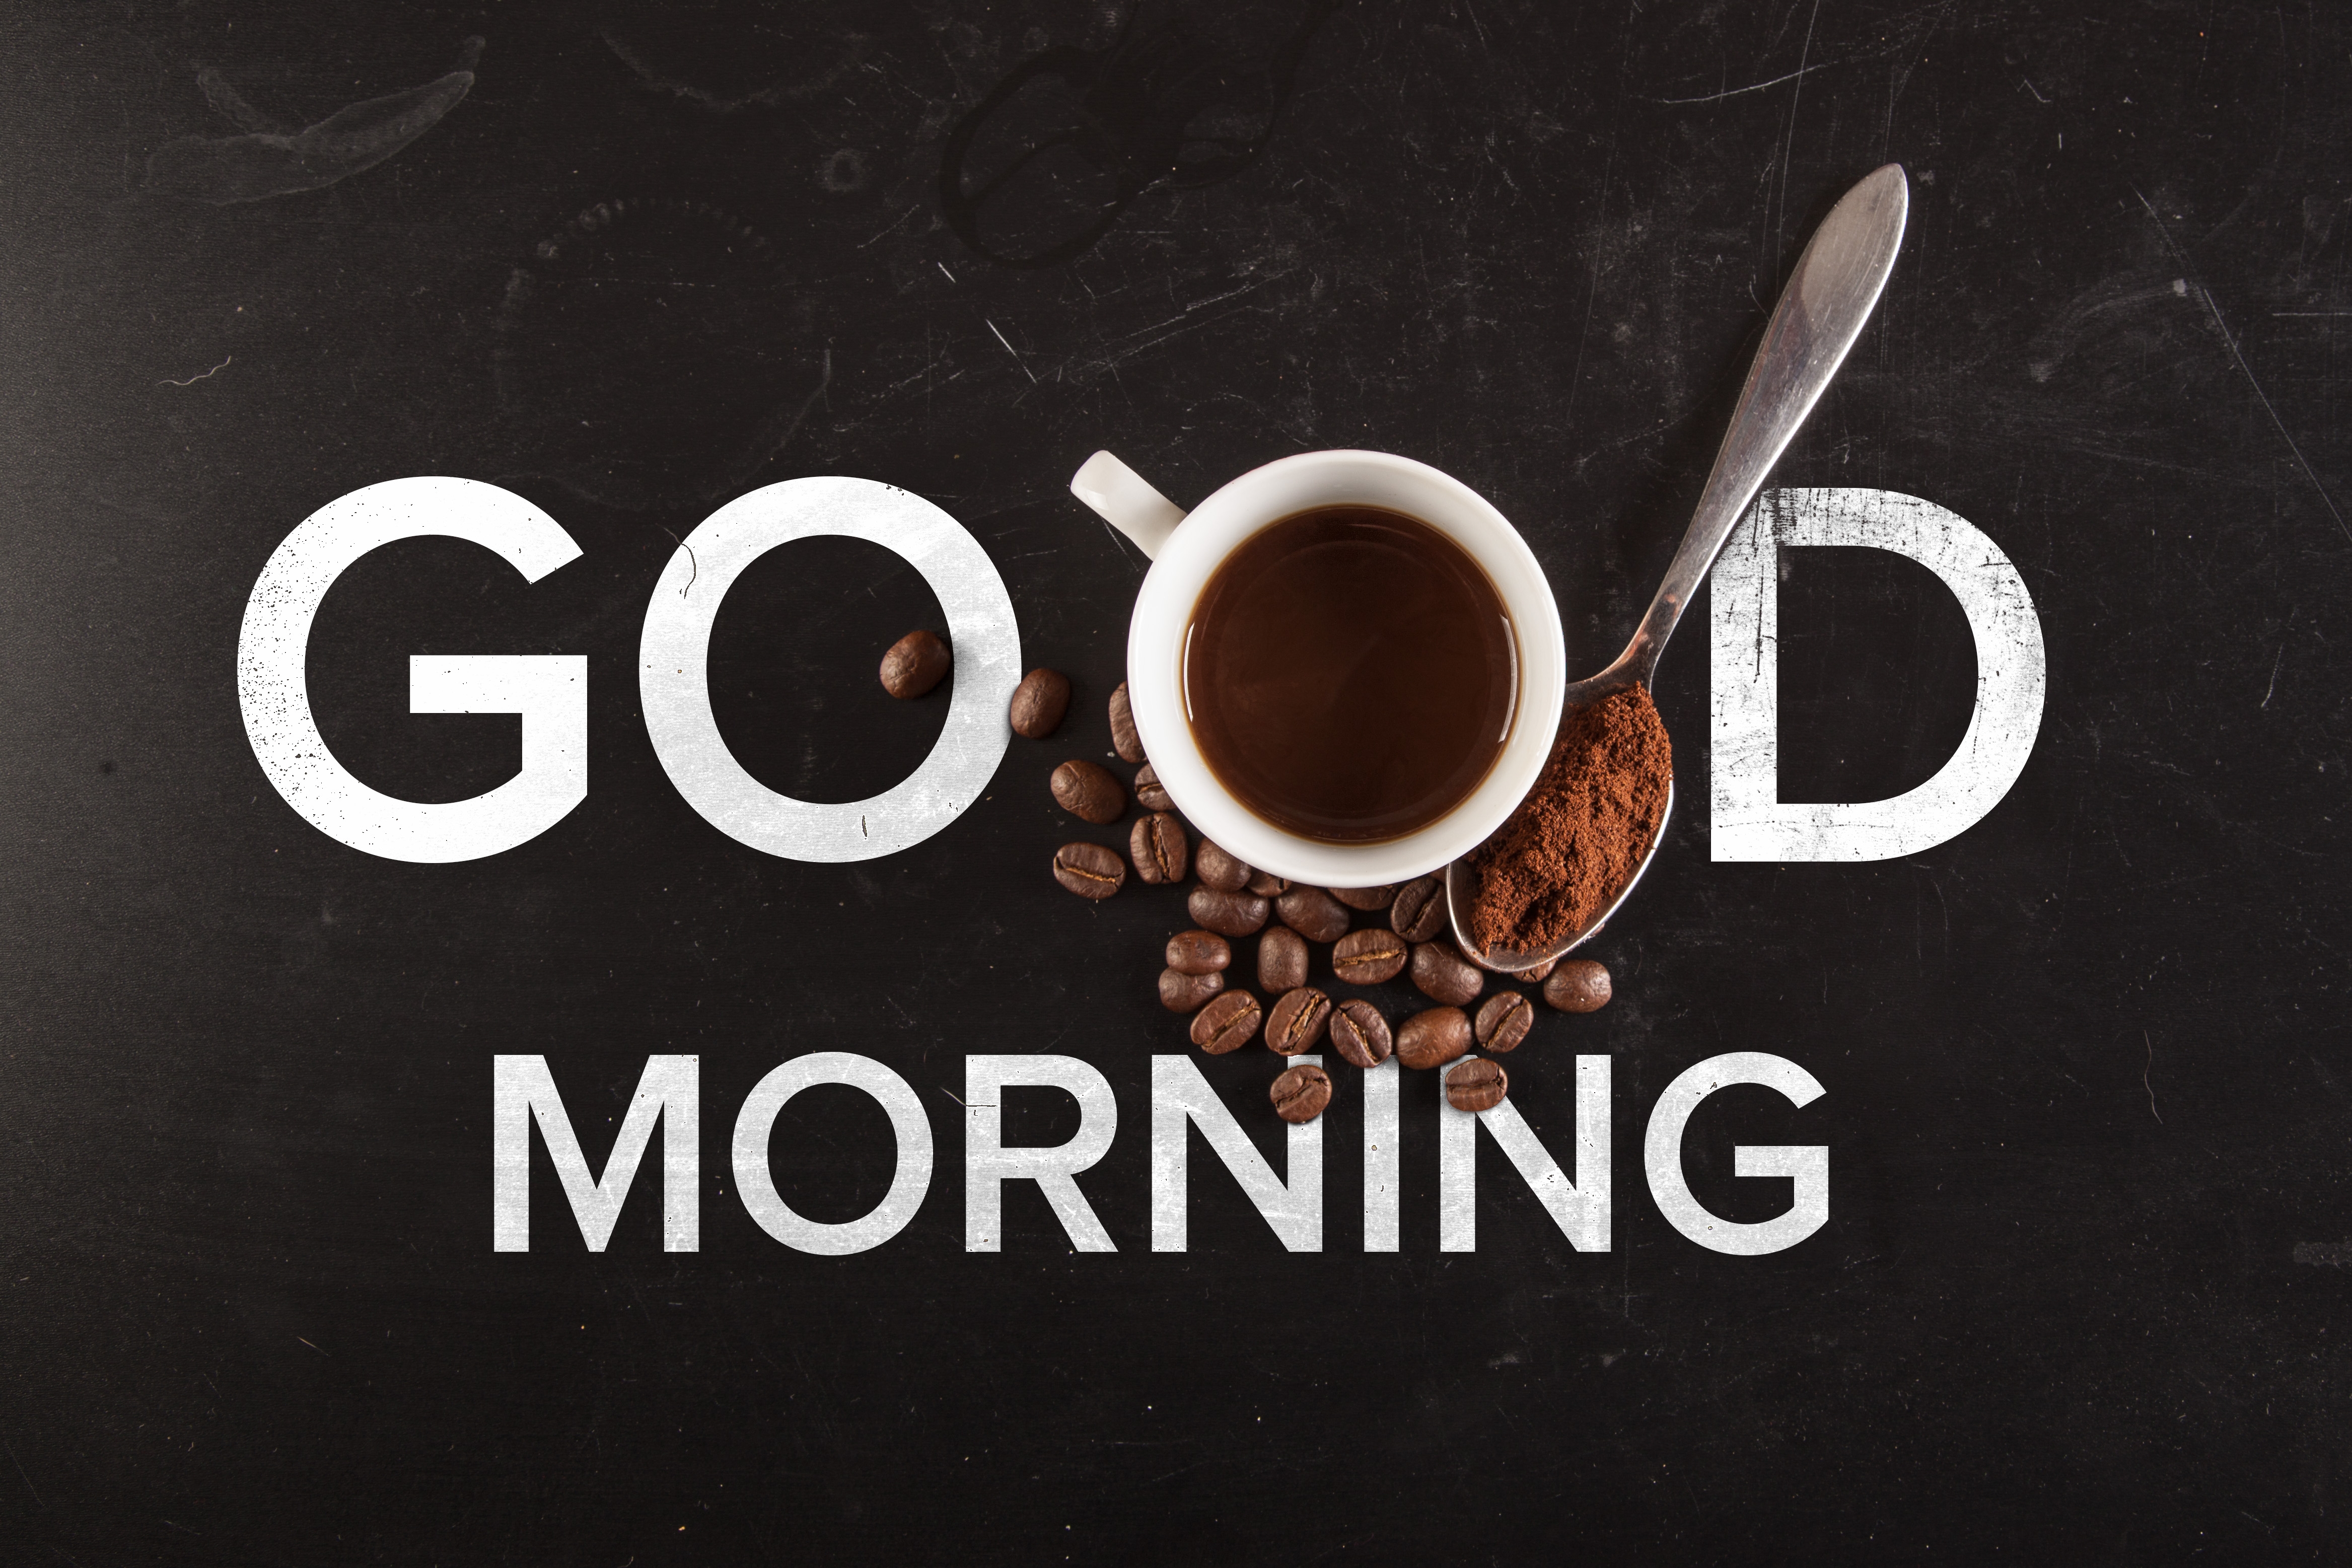 HD wallpaper, 5K, Dark Background, Coffee, Coffee Cup, Typography, Coffee Beans, Good Morning